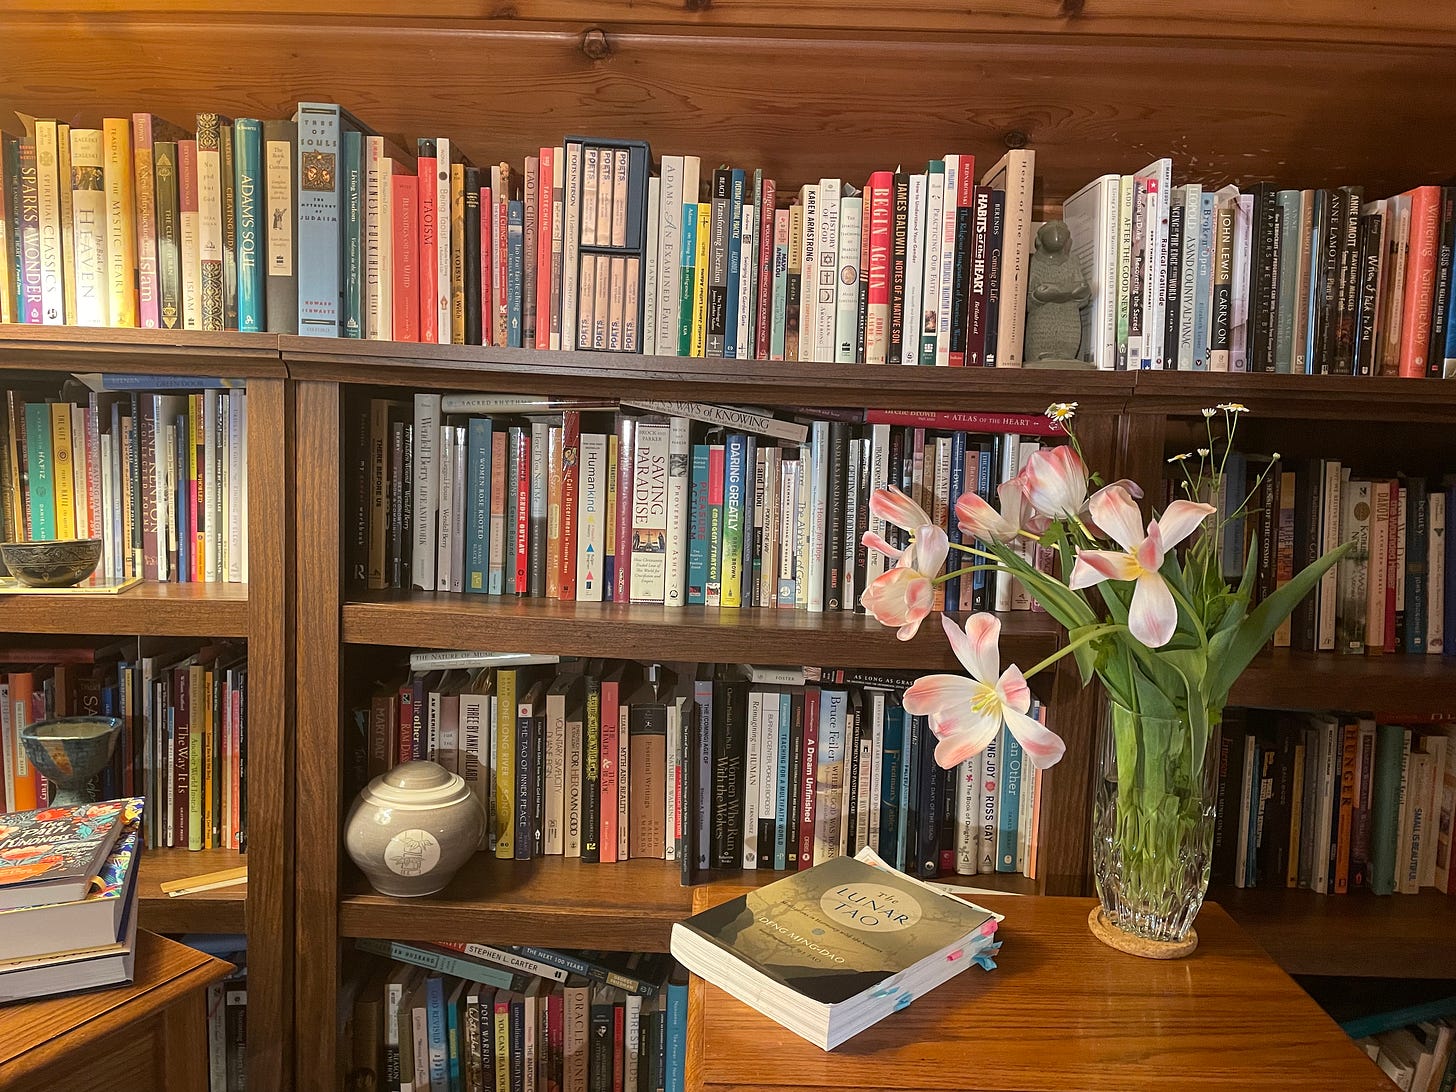 A wall of bookshelves with a table in front holding another book and a vase of flowers